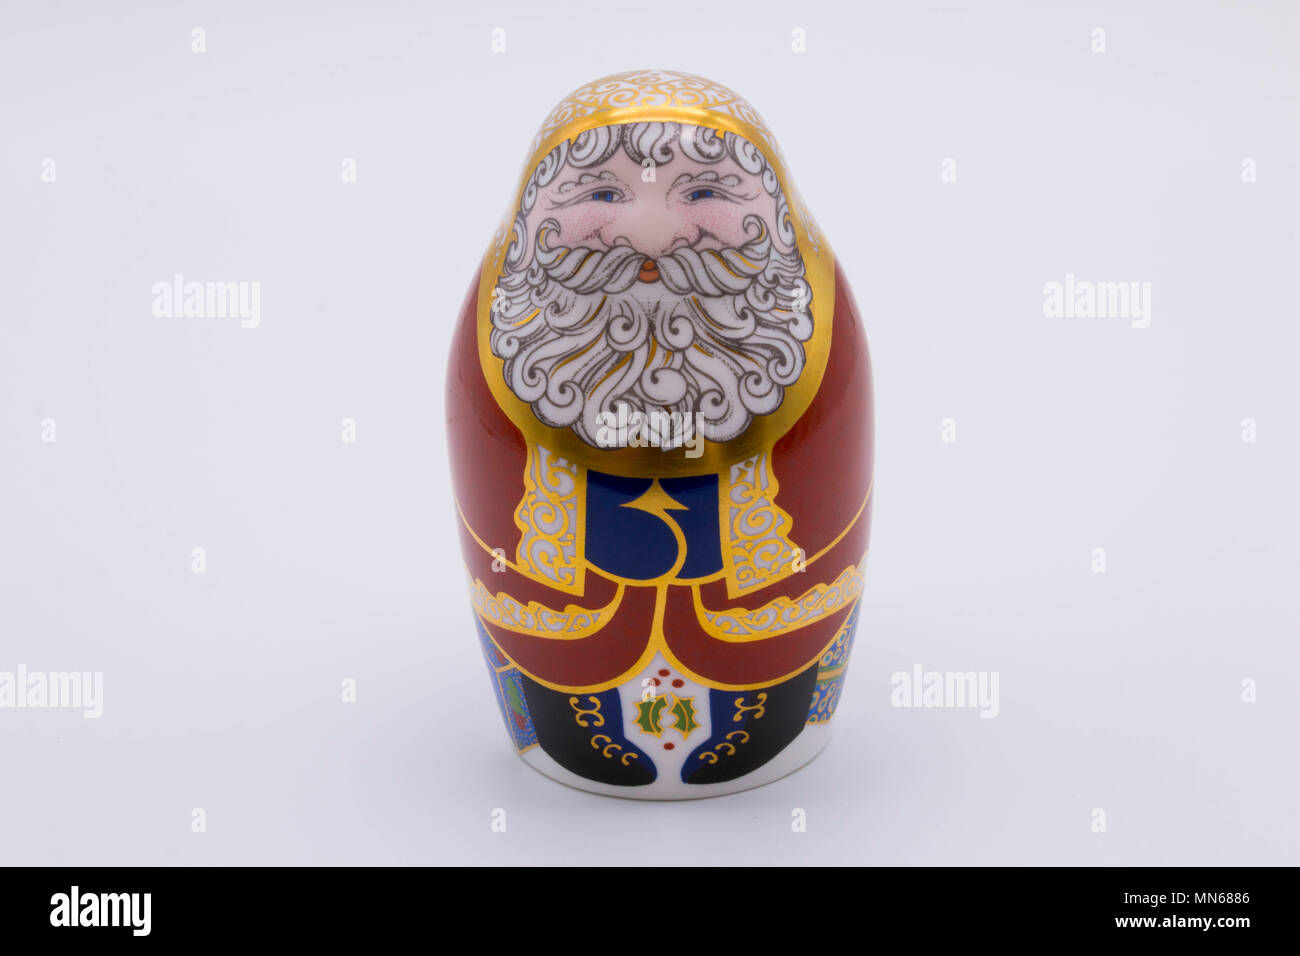 Royal Crown Derby bone china paperweight of Father Christmas uk Stock Photo